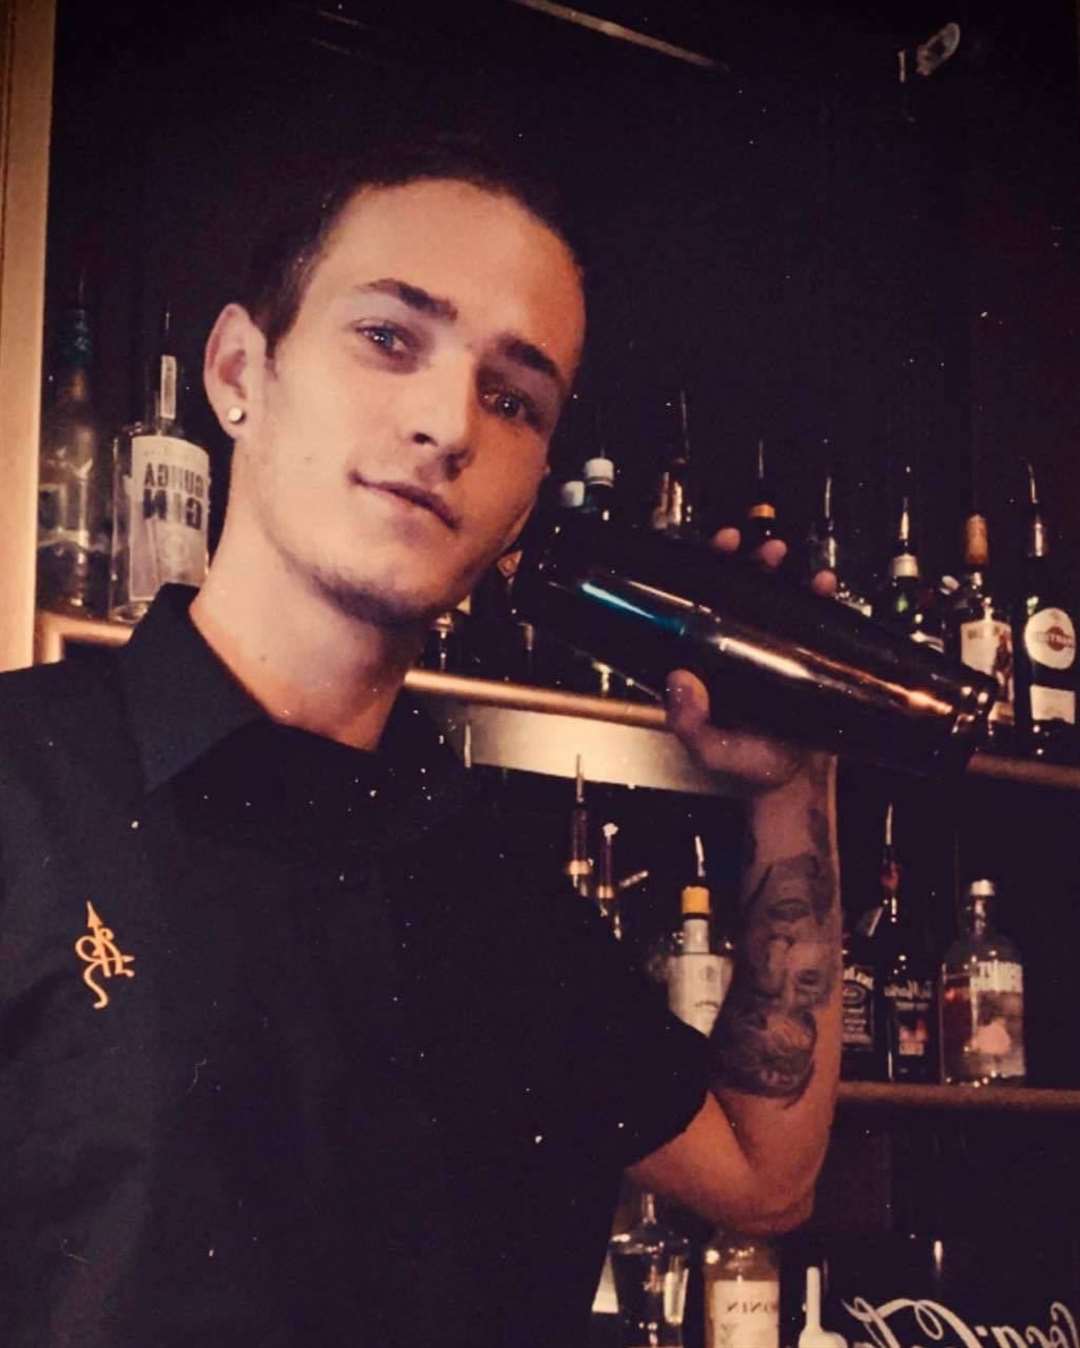 Toby Barrowcliff worked at bars across east Kent